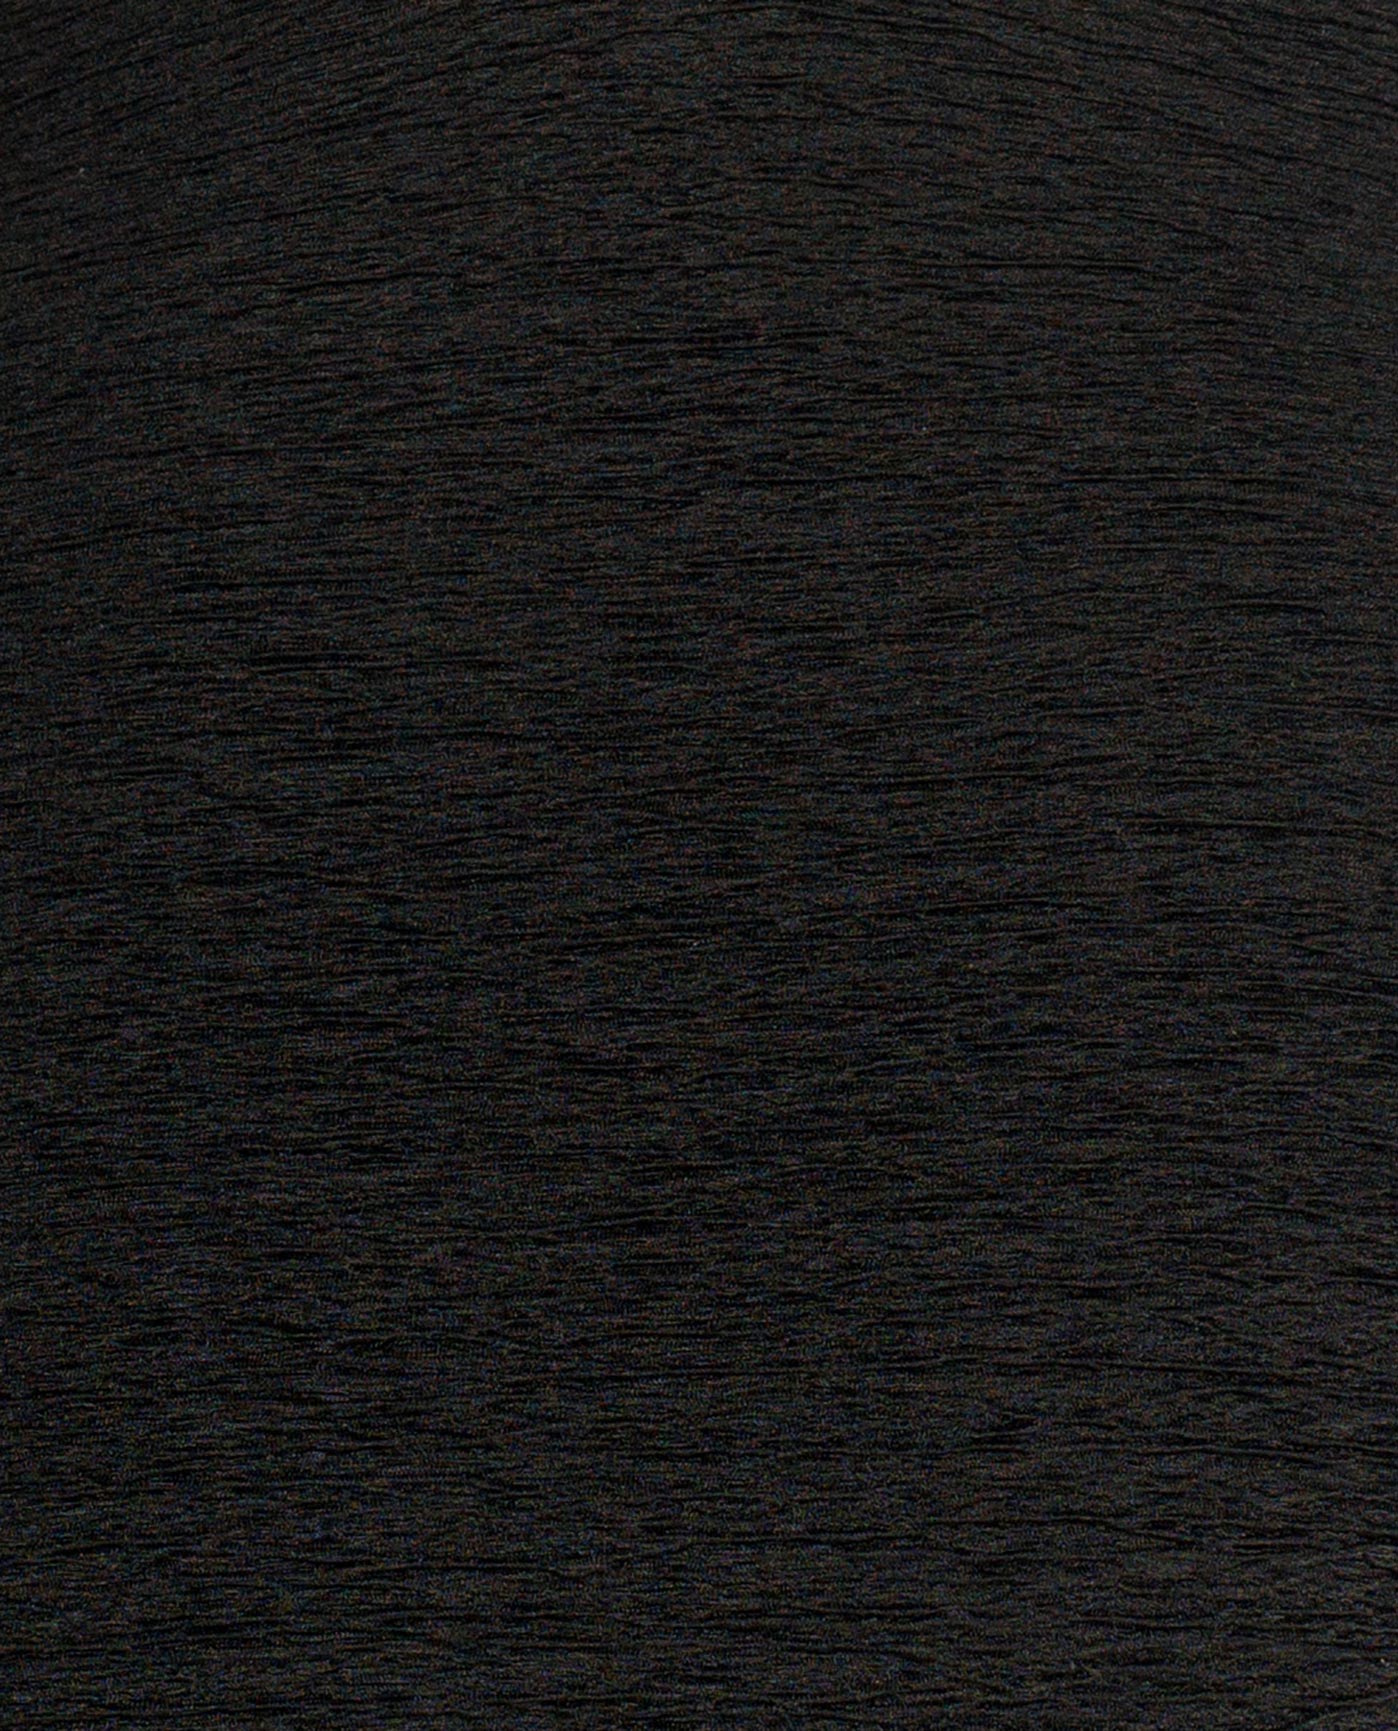 FABRIC SWATCH VIEW OF CHLORINE RESISTANT KRINKLE TEXTURED SOLID HIGH NECK PLUS SIZE ONE PIECE | KRINKLE BLACK 2023